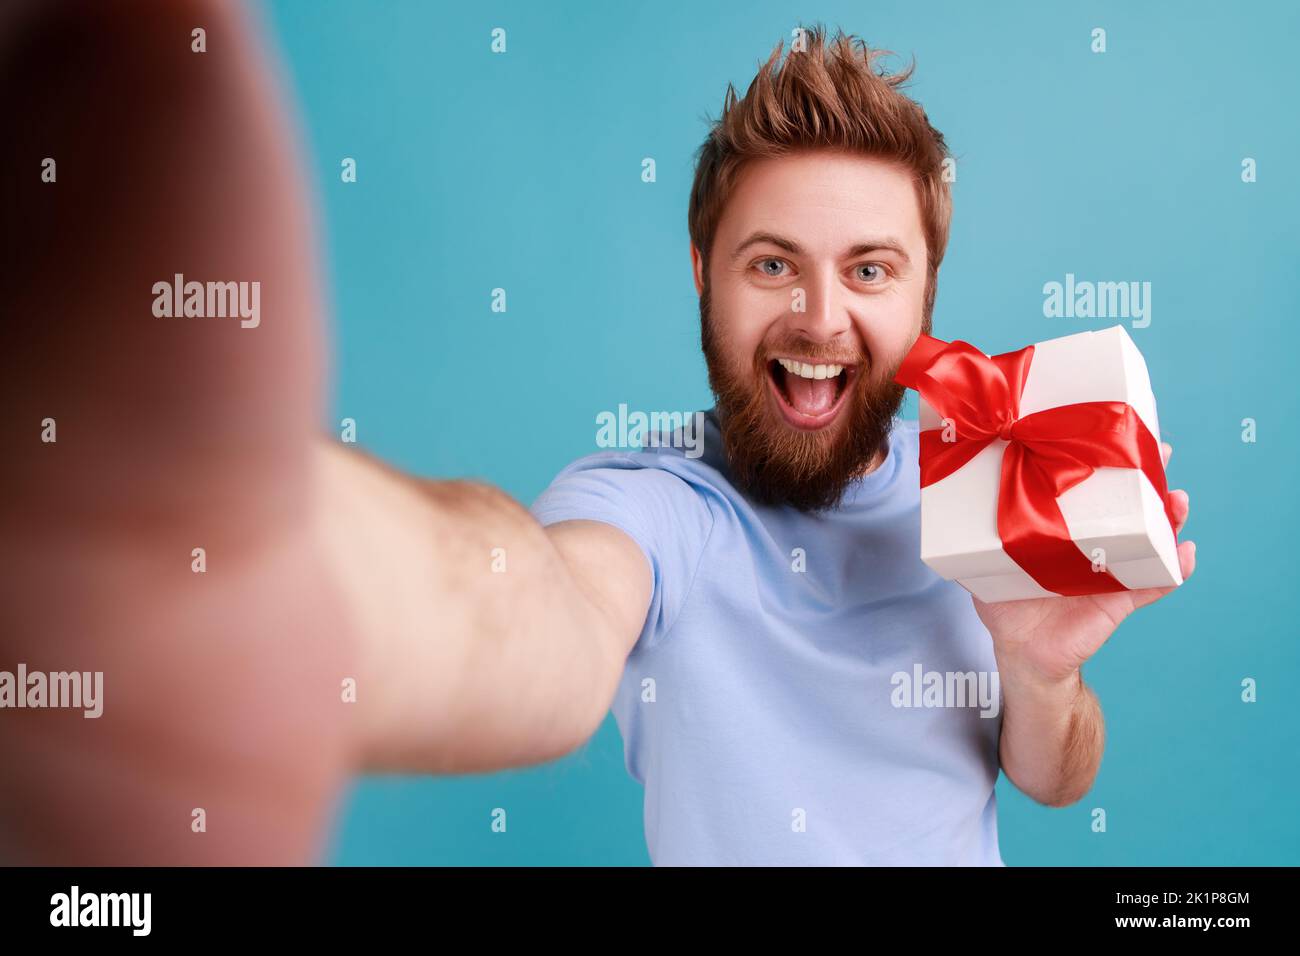 Portrait of positive bearded man with widely opened mouth looking at camera with happy smile POV, point of view of photo, holding present box. Indoor studio shot isolated on blue background. Stock Photo